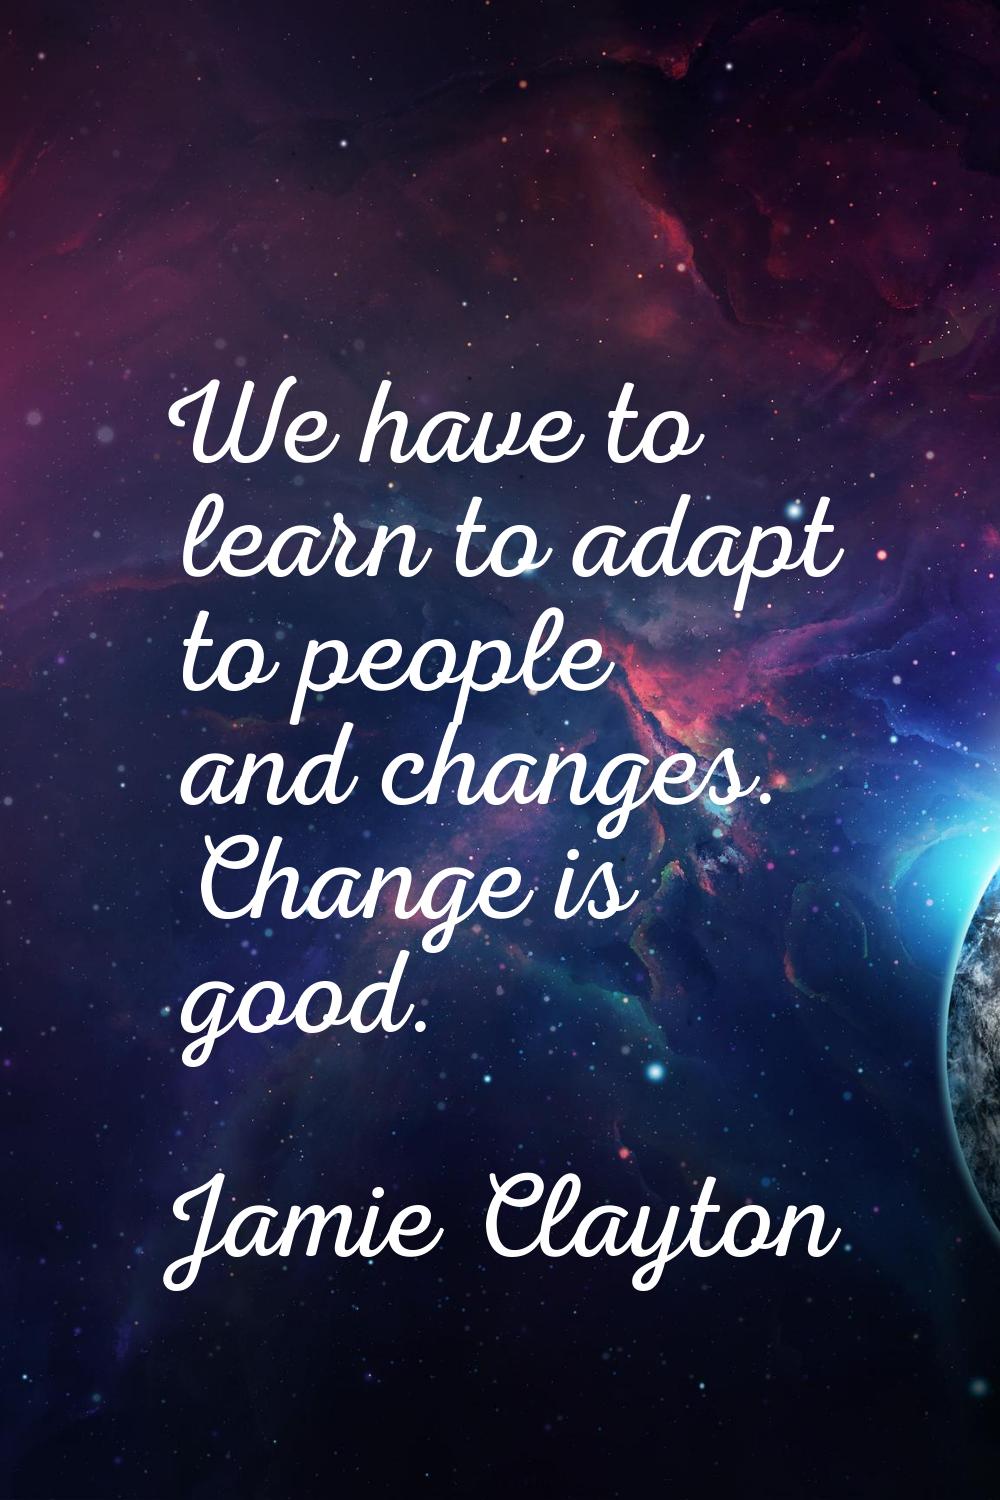 We have to learn to adapt to people and changes. Change is good.